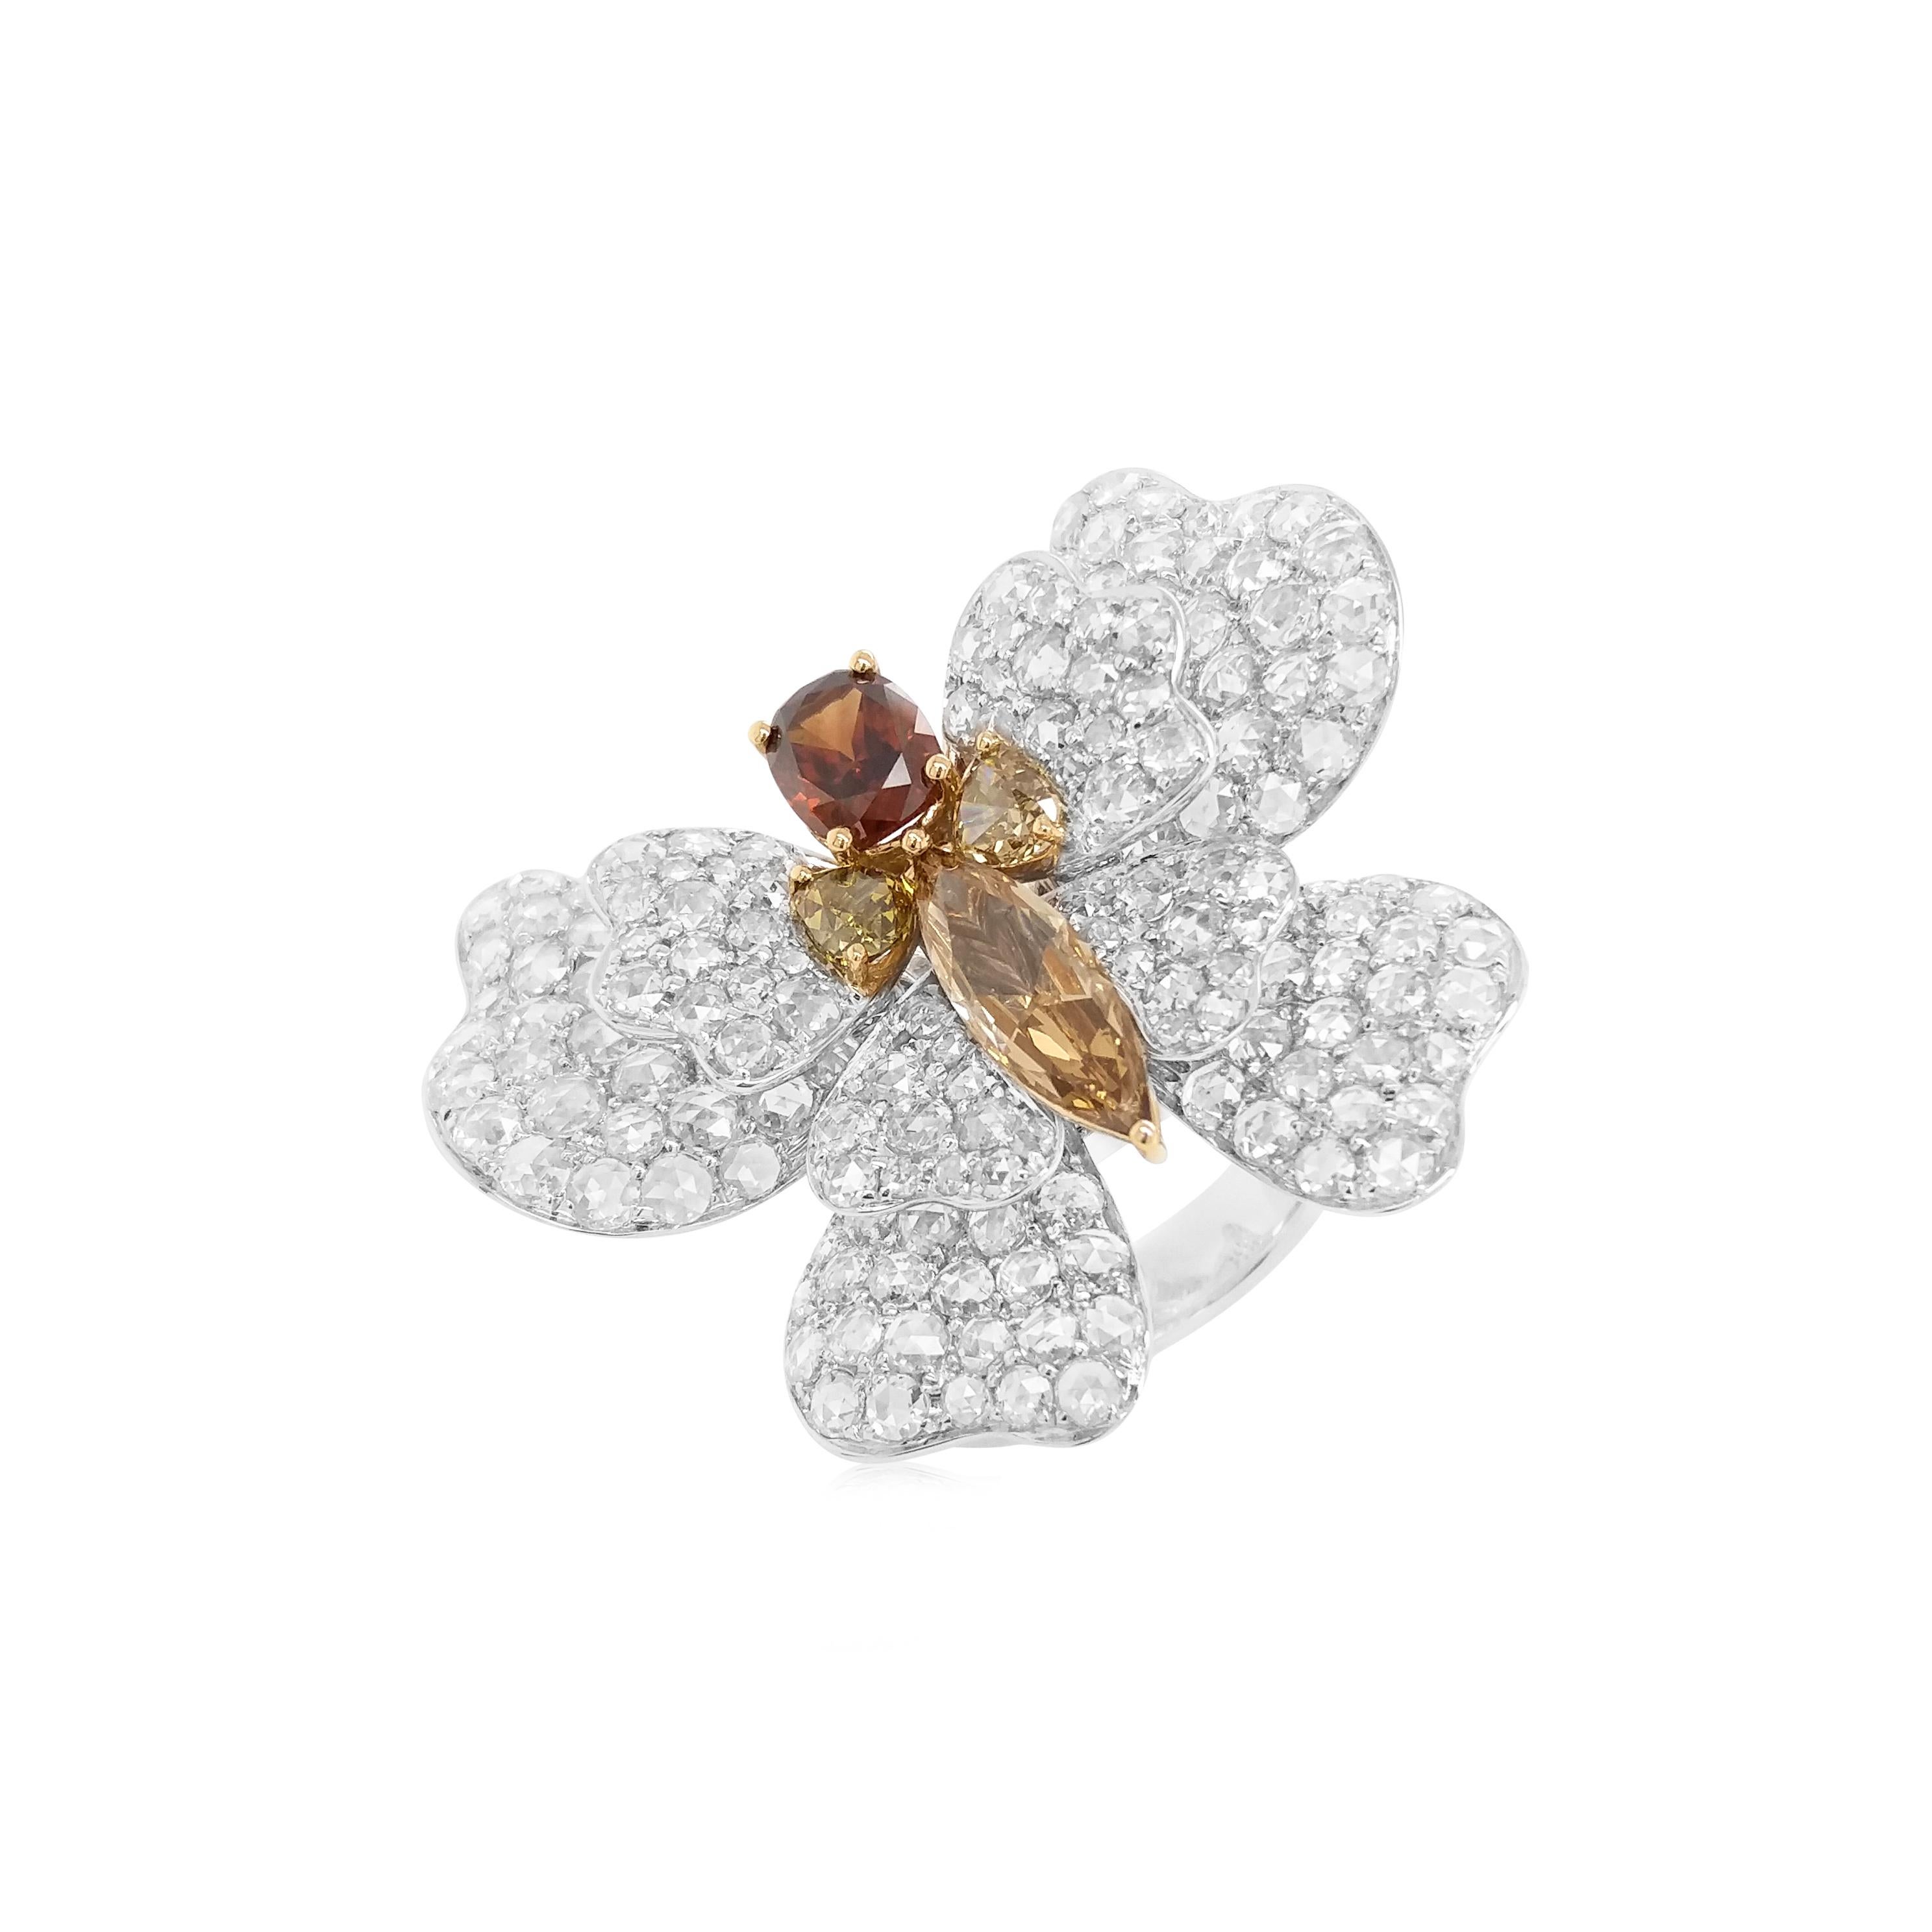 Contemporary IGI Certified Fancy Color Diamond 18k Gold Detachable Cocktail Ring and Pendant